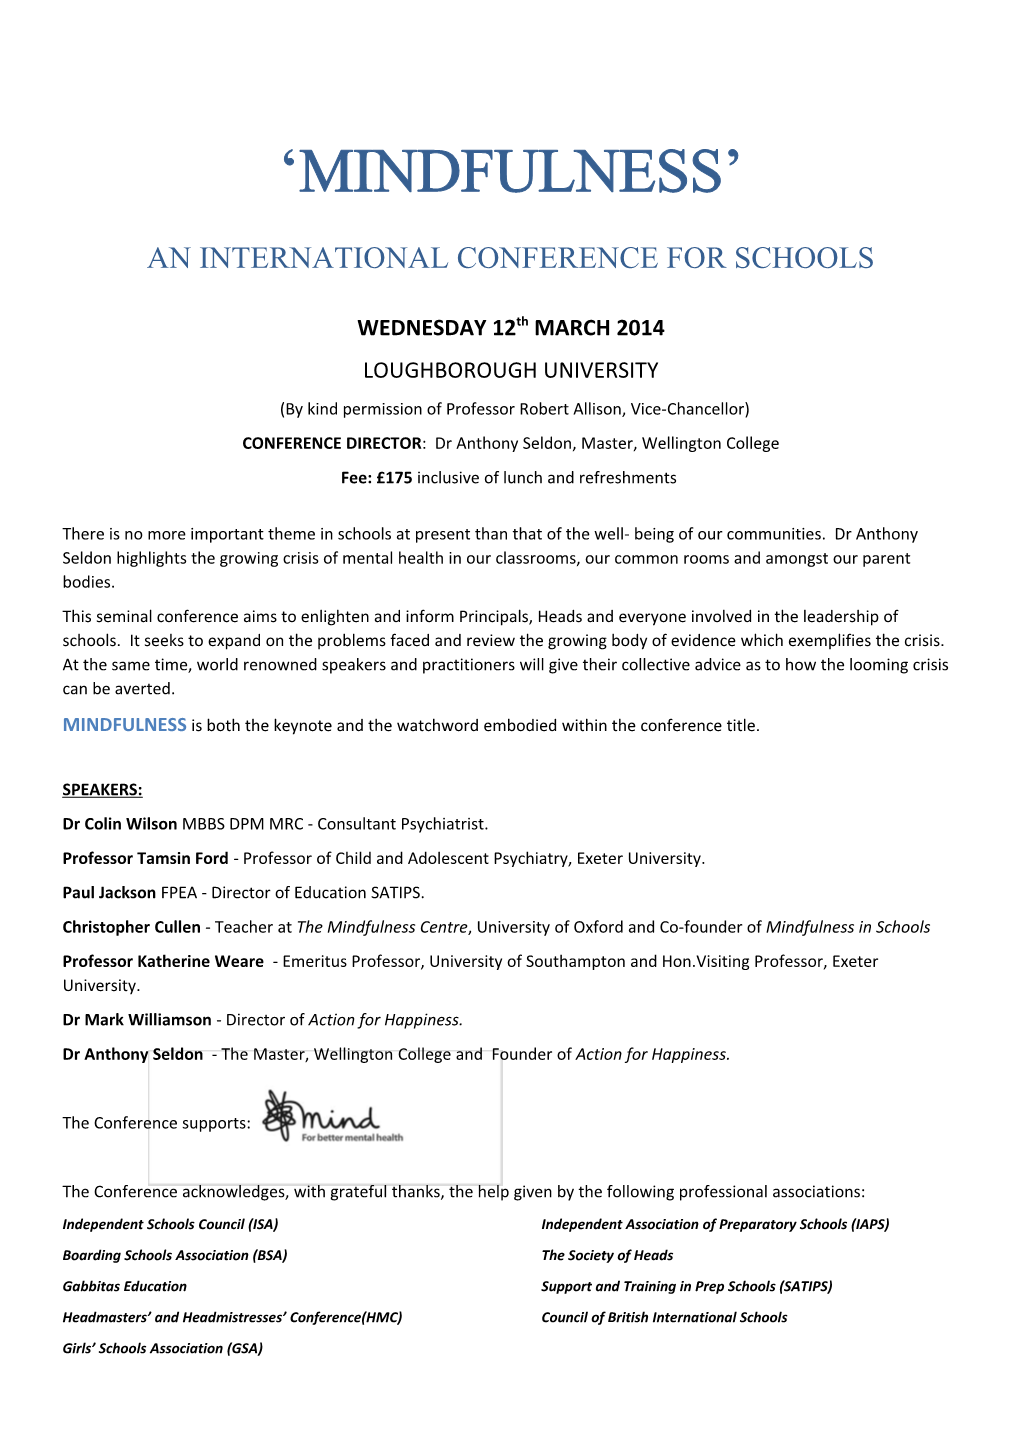 An International Conference for Schools